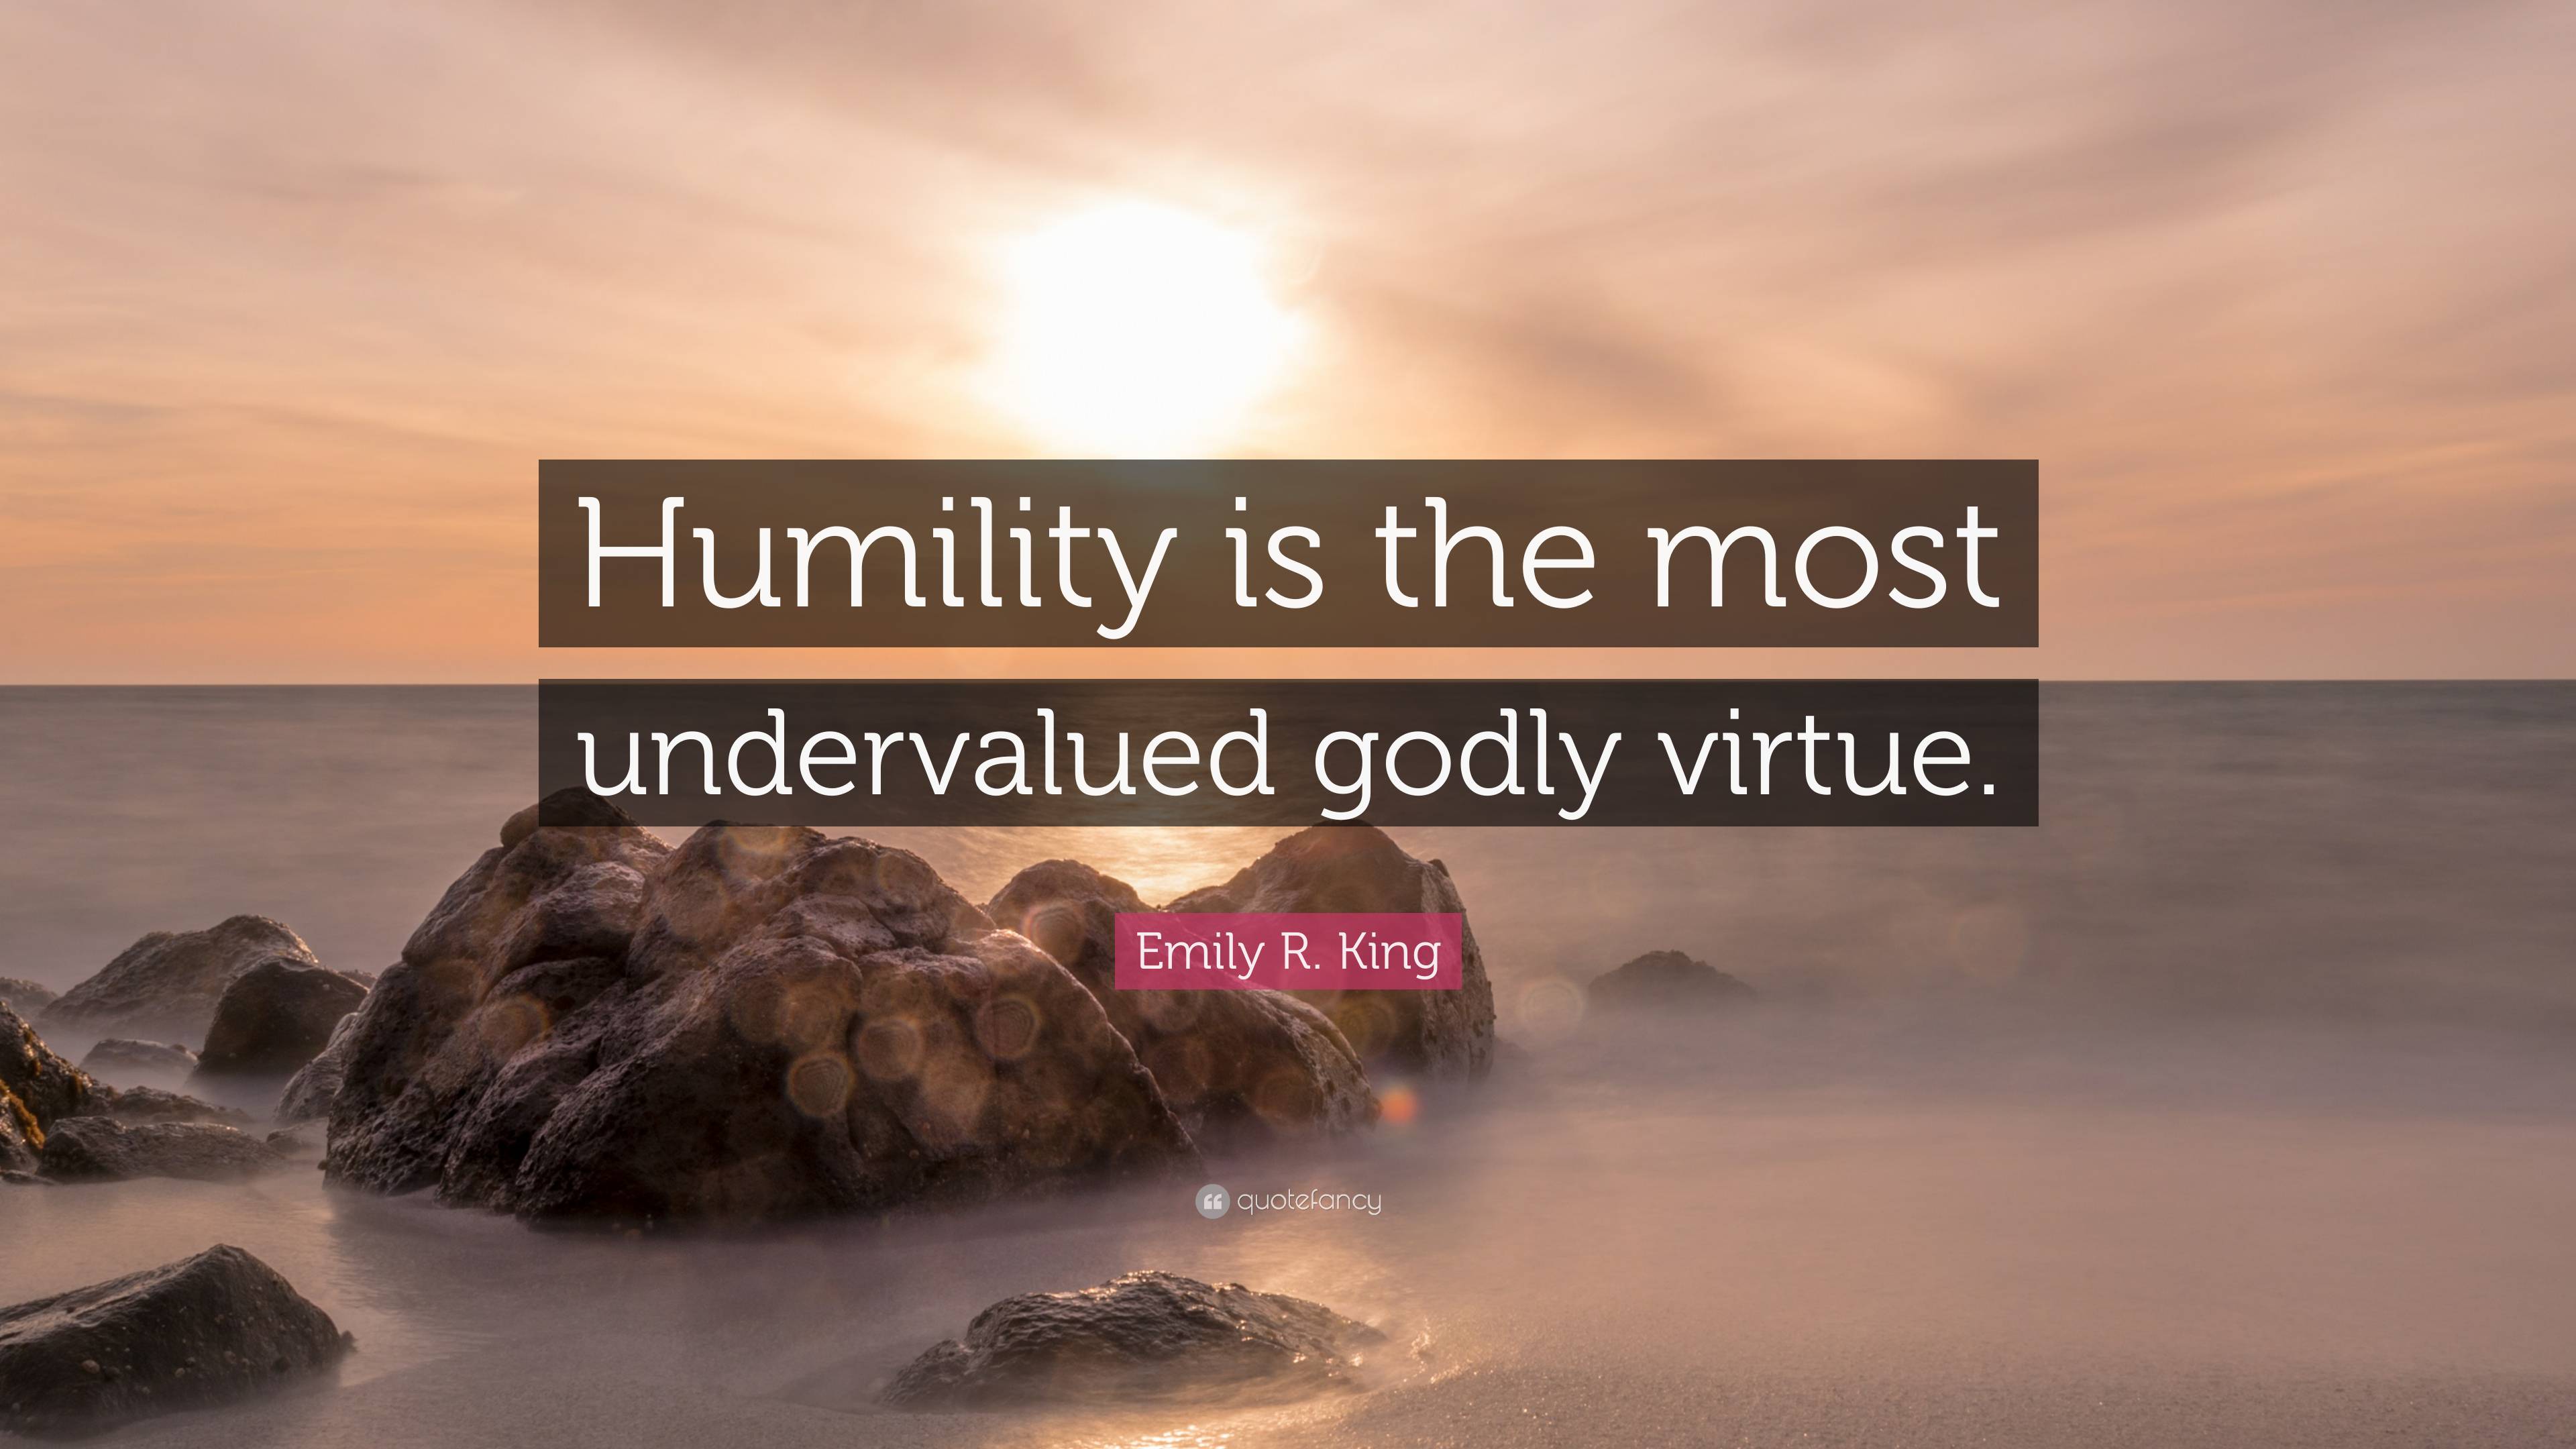 Emily R. King Quote: “Humility is the most undervalued godly virtue.”